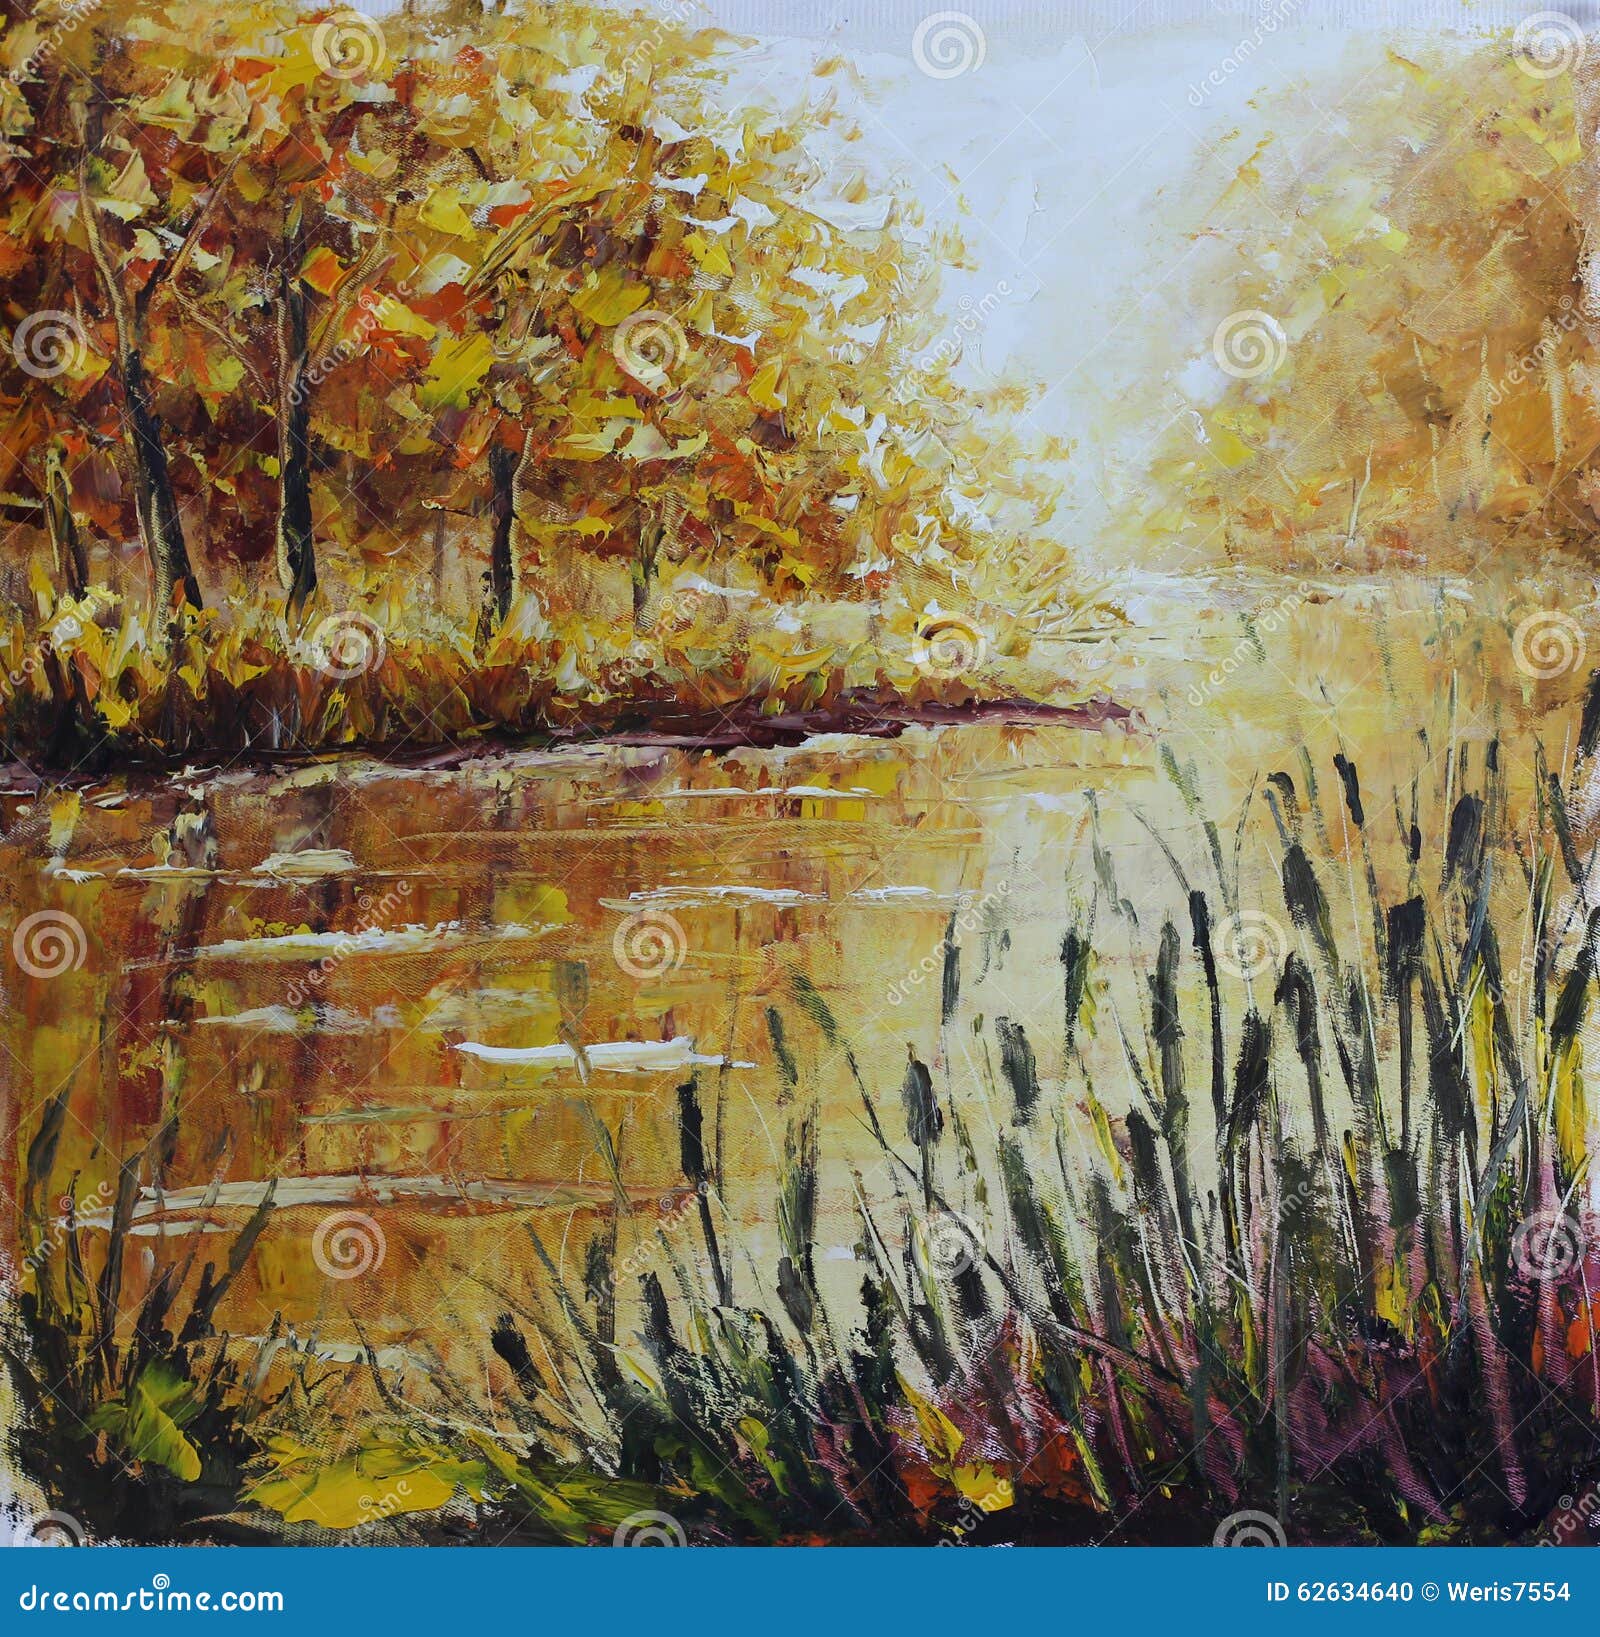 River In Autumn Forest Oil Painting Stock Illustration Illustration